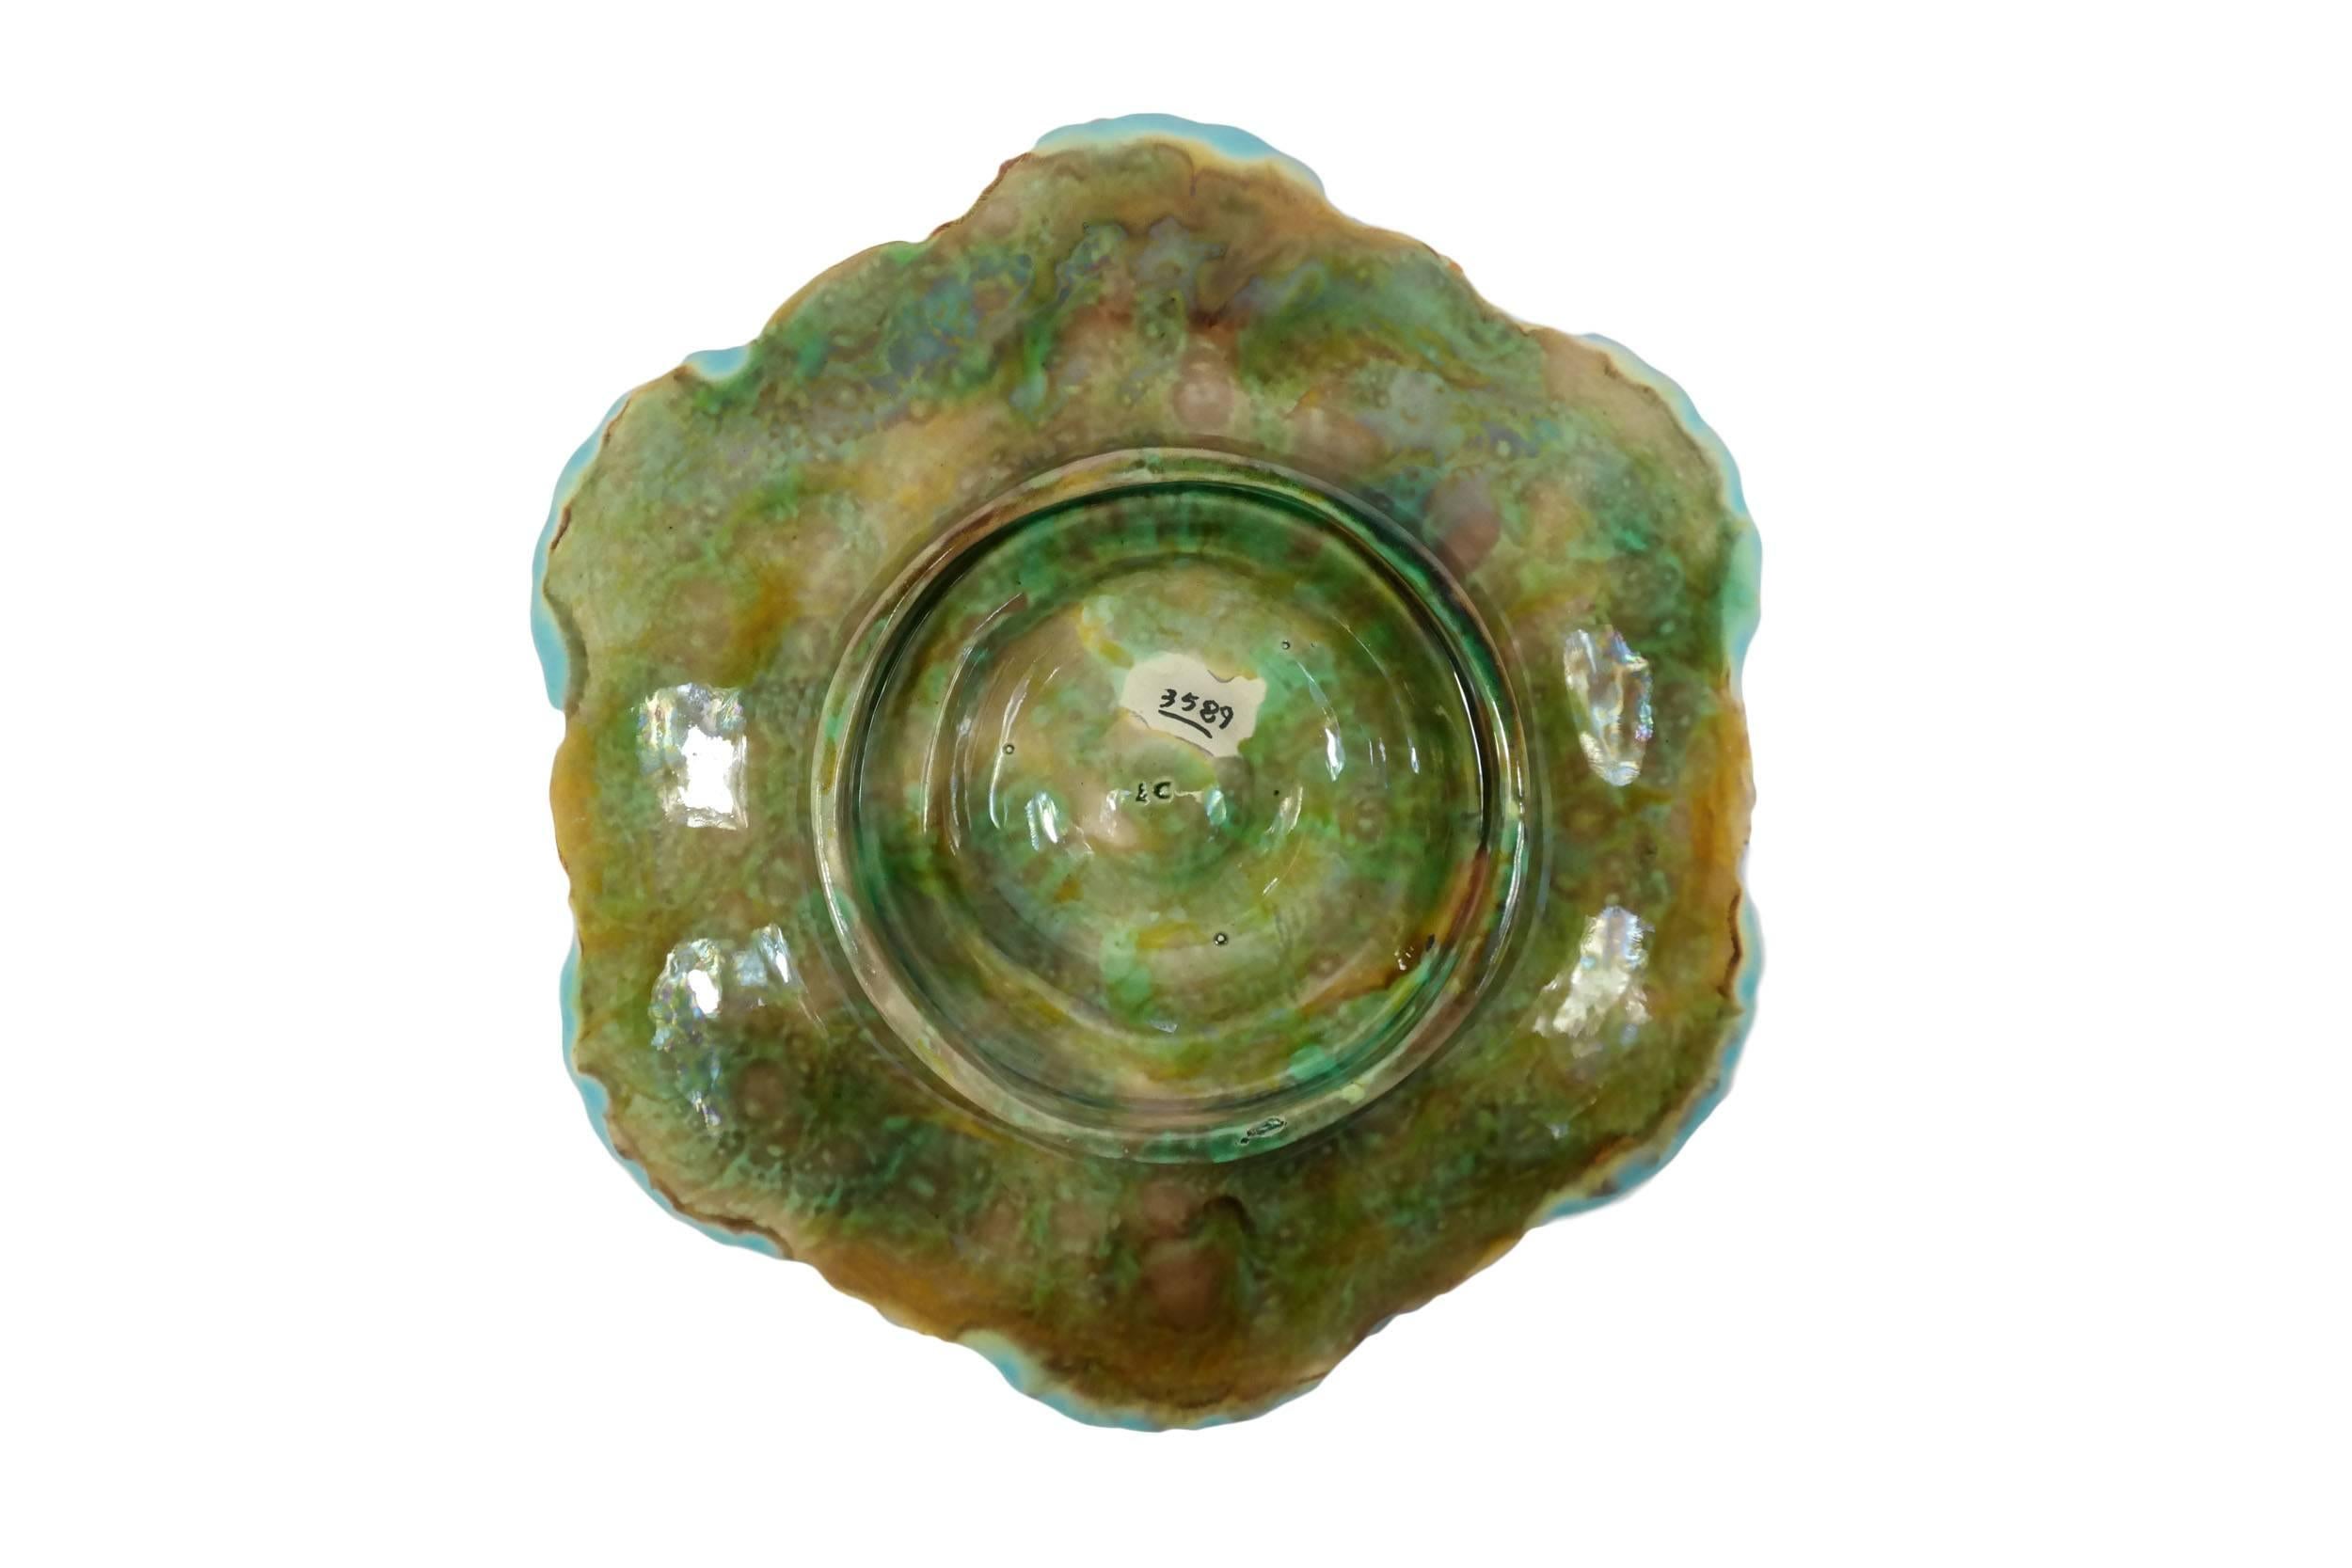 George Jones oyster plate in turquoise, with central well, pattern number to reverse (3589).


Marilyn G. Karmason and Joan B. Stake, Majolica: A Complete History and Illustrated Survey, New York: Harry Abrams Publishers, 1989, illustrated, p. 96.